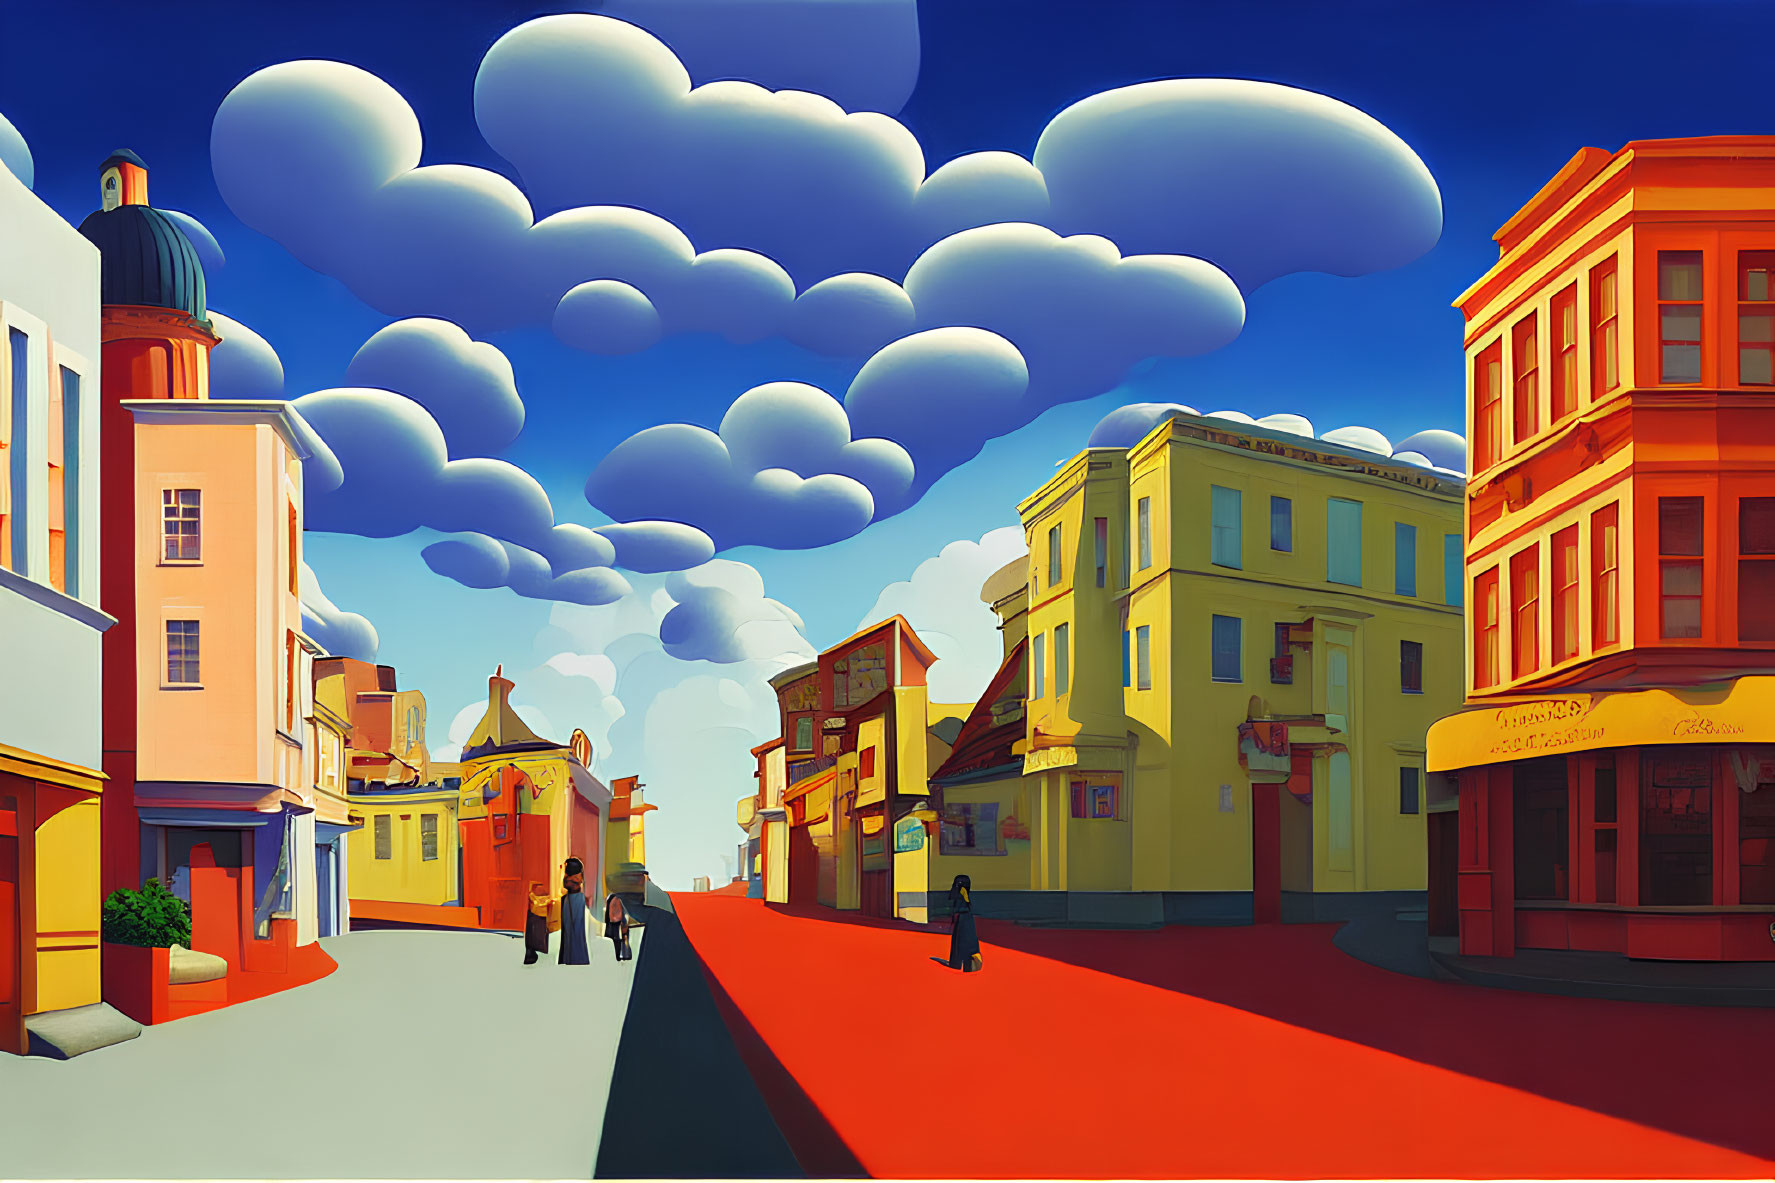 Vibrant urban street scene with colorful buildings and fluffy clouds